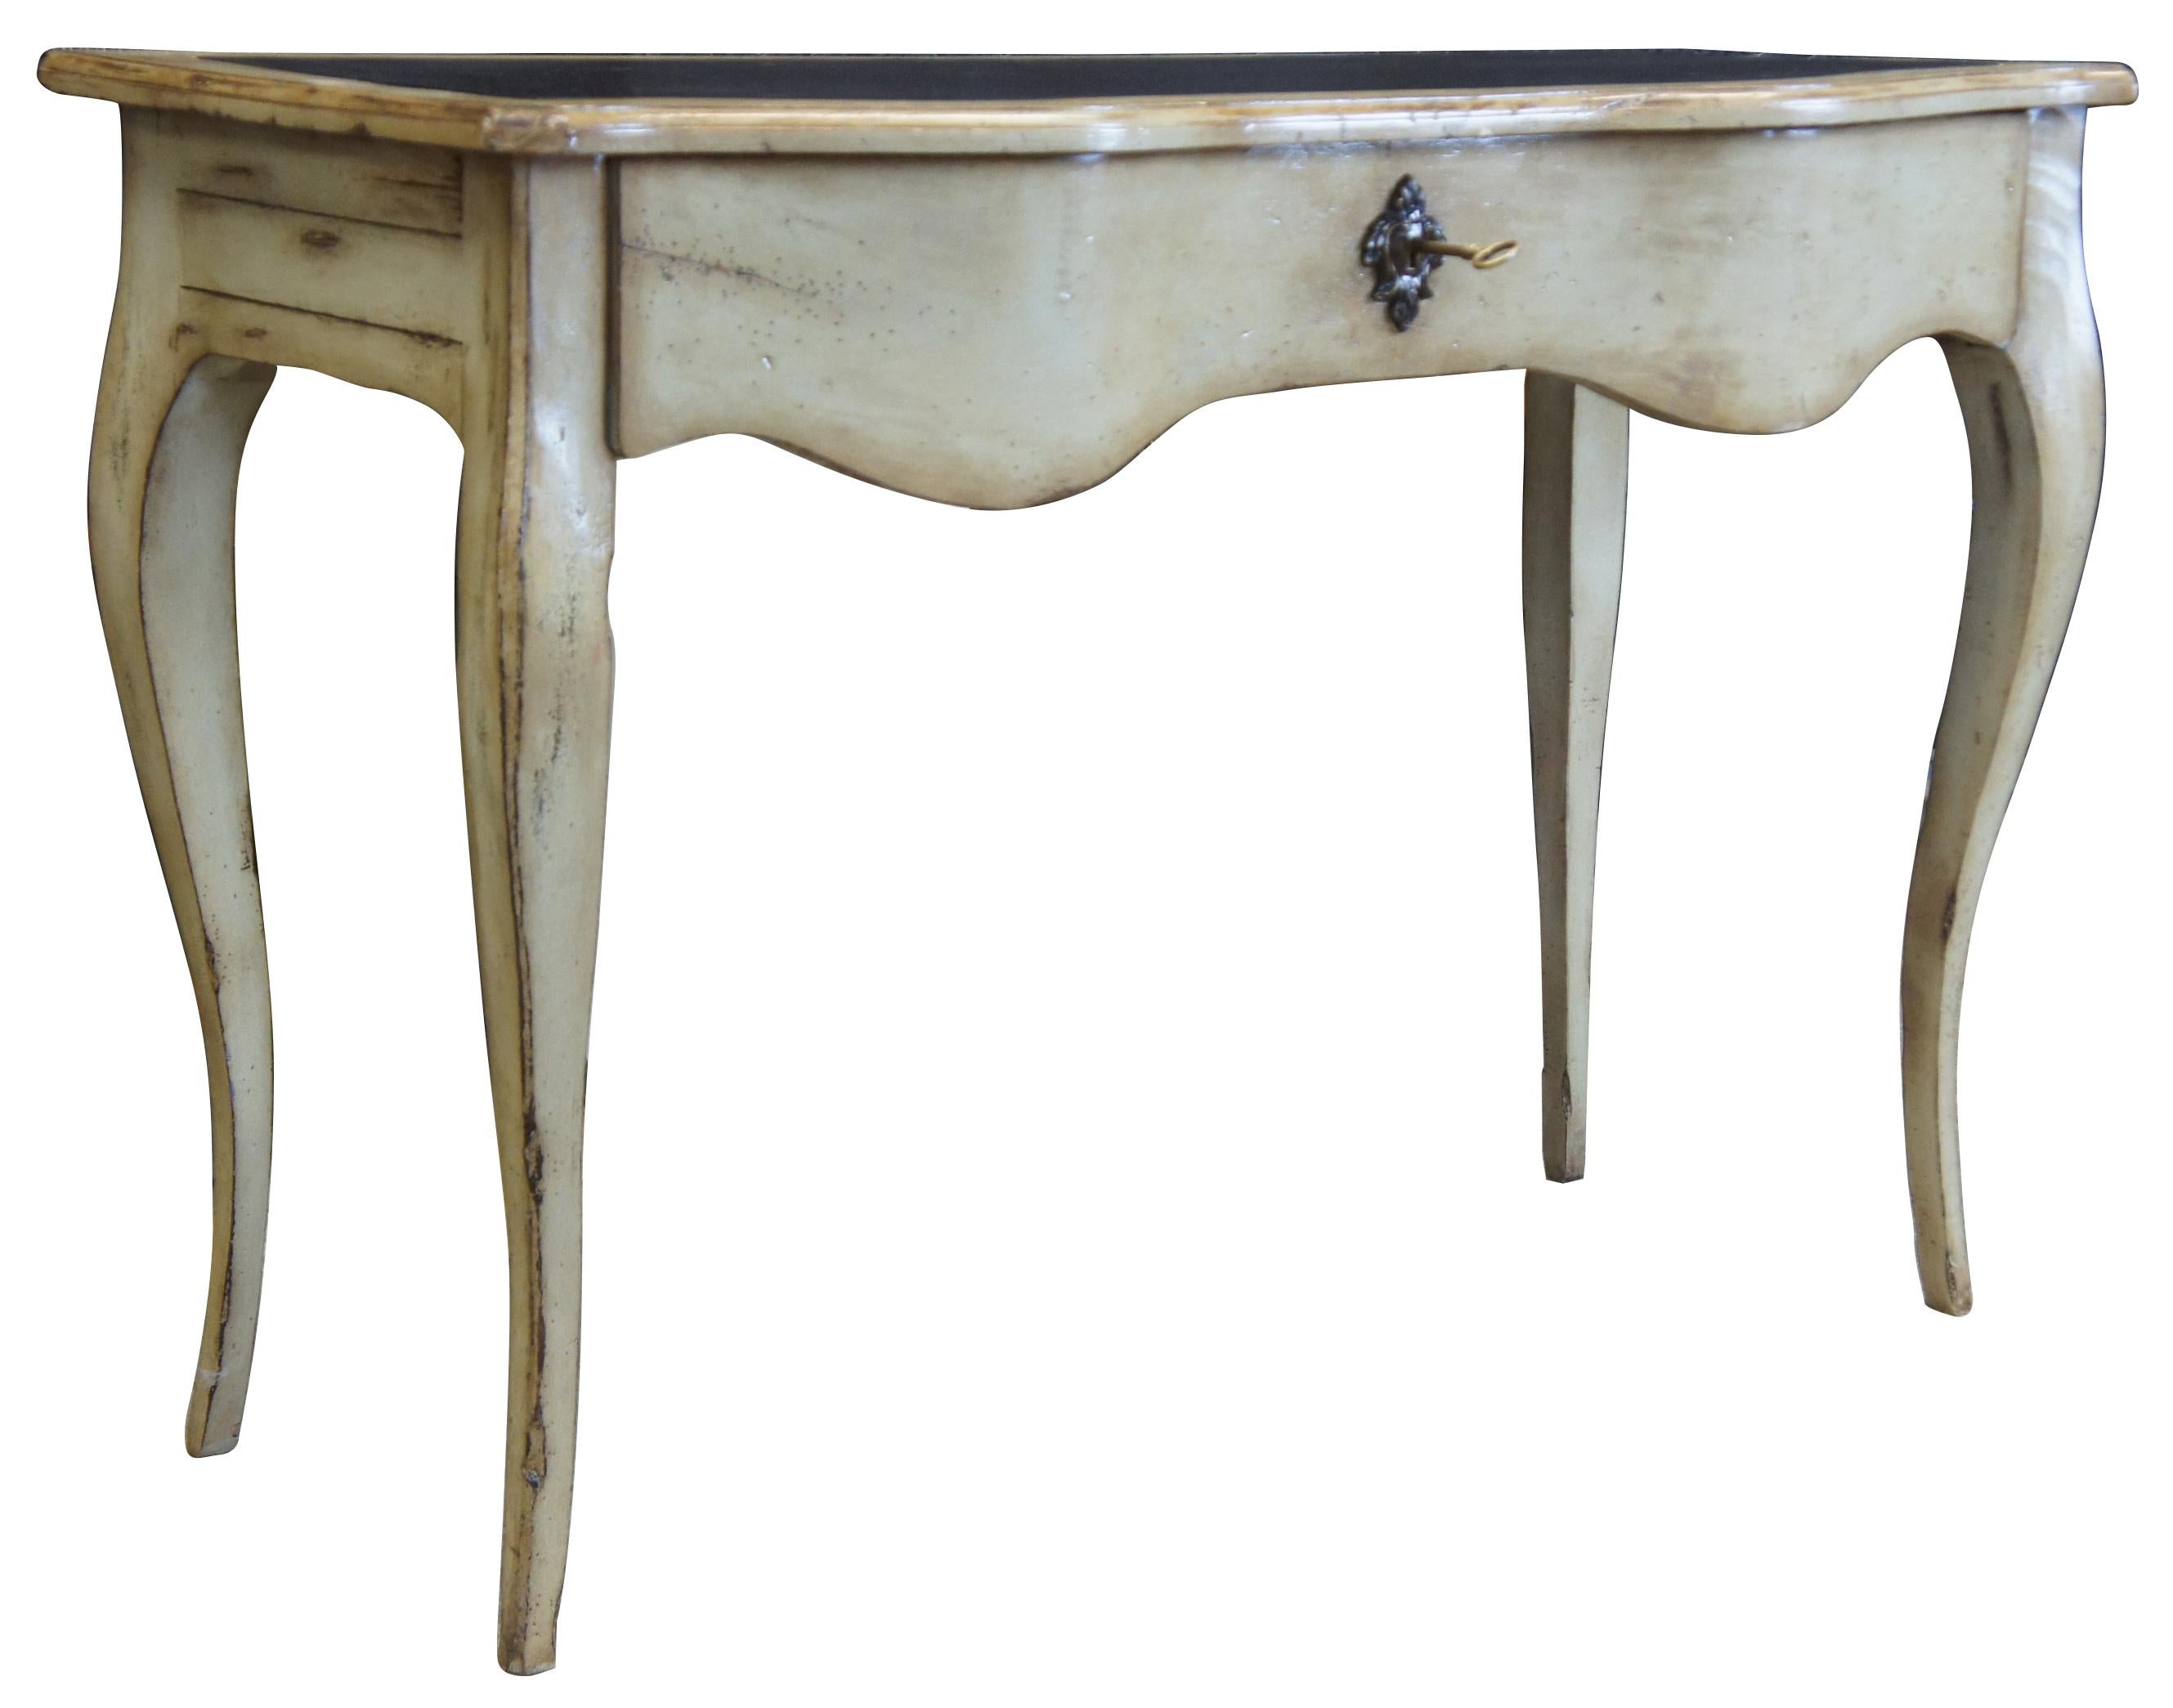 20th century reproduction of a French Oxbow console table. Features a painted oak finish with distressing, inset leather top and large drawer with lock and key. The table is supported by four long cabriole legs.
 